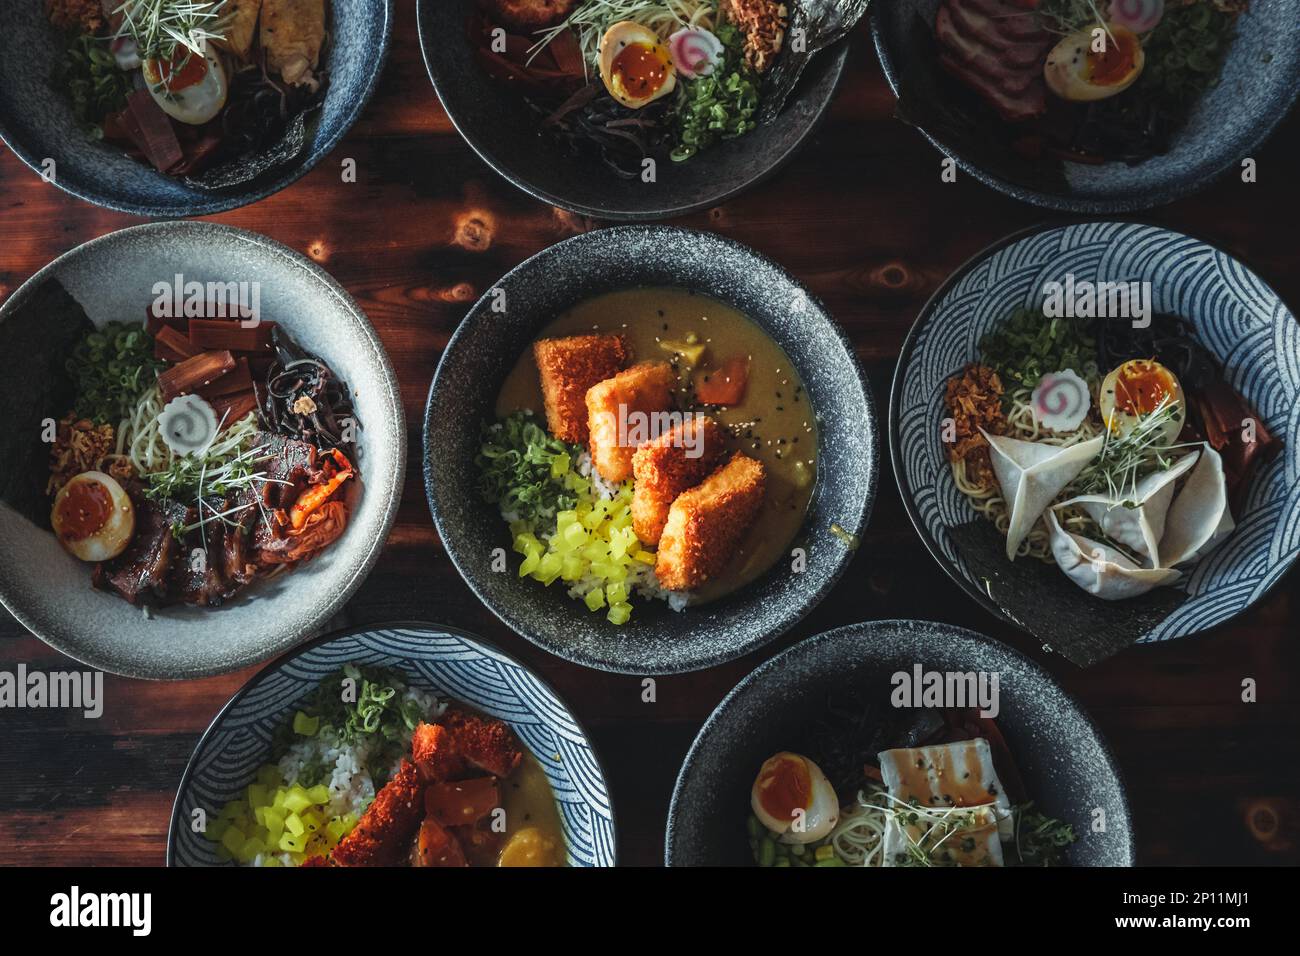 Savory Delights: A Top-Down View of Thai and Asian Cuisine. The colorful ingredients, intricate garnishes, and stunning presentation are a feast for t Stock Photo